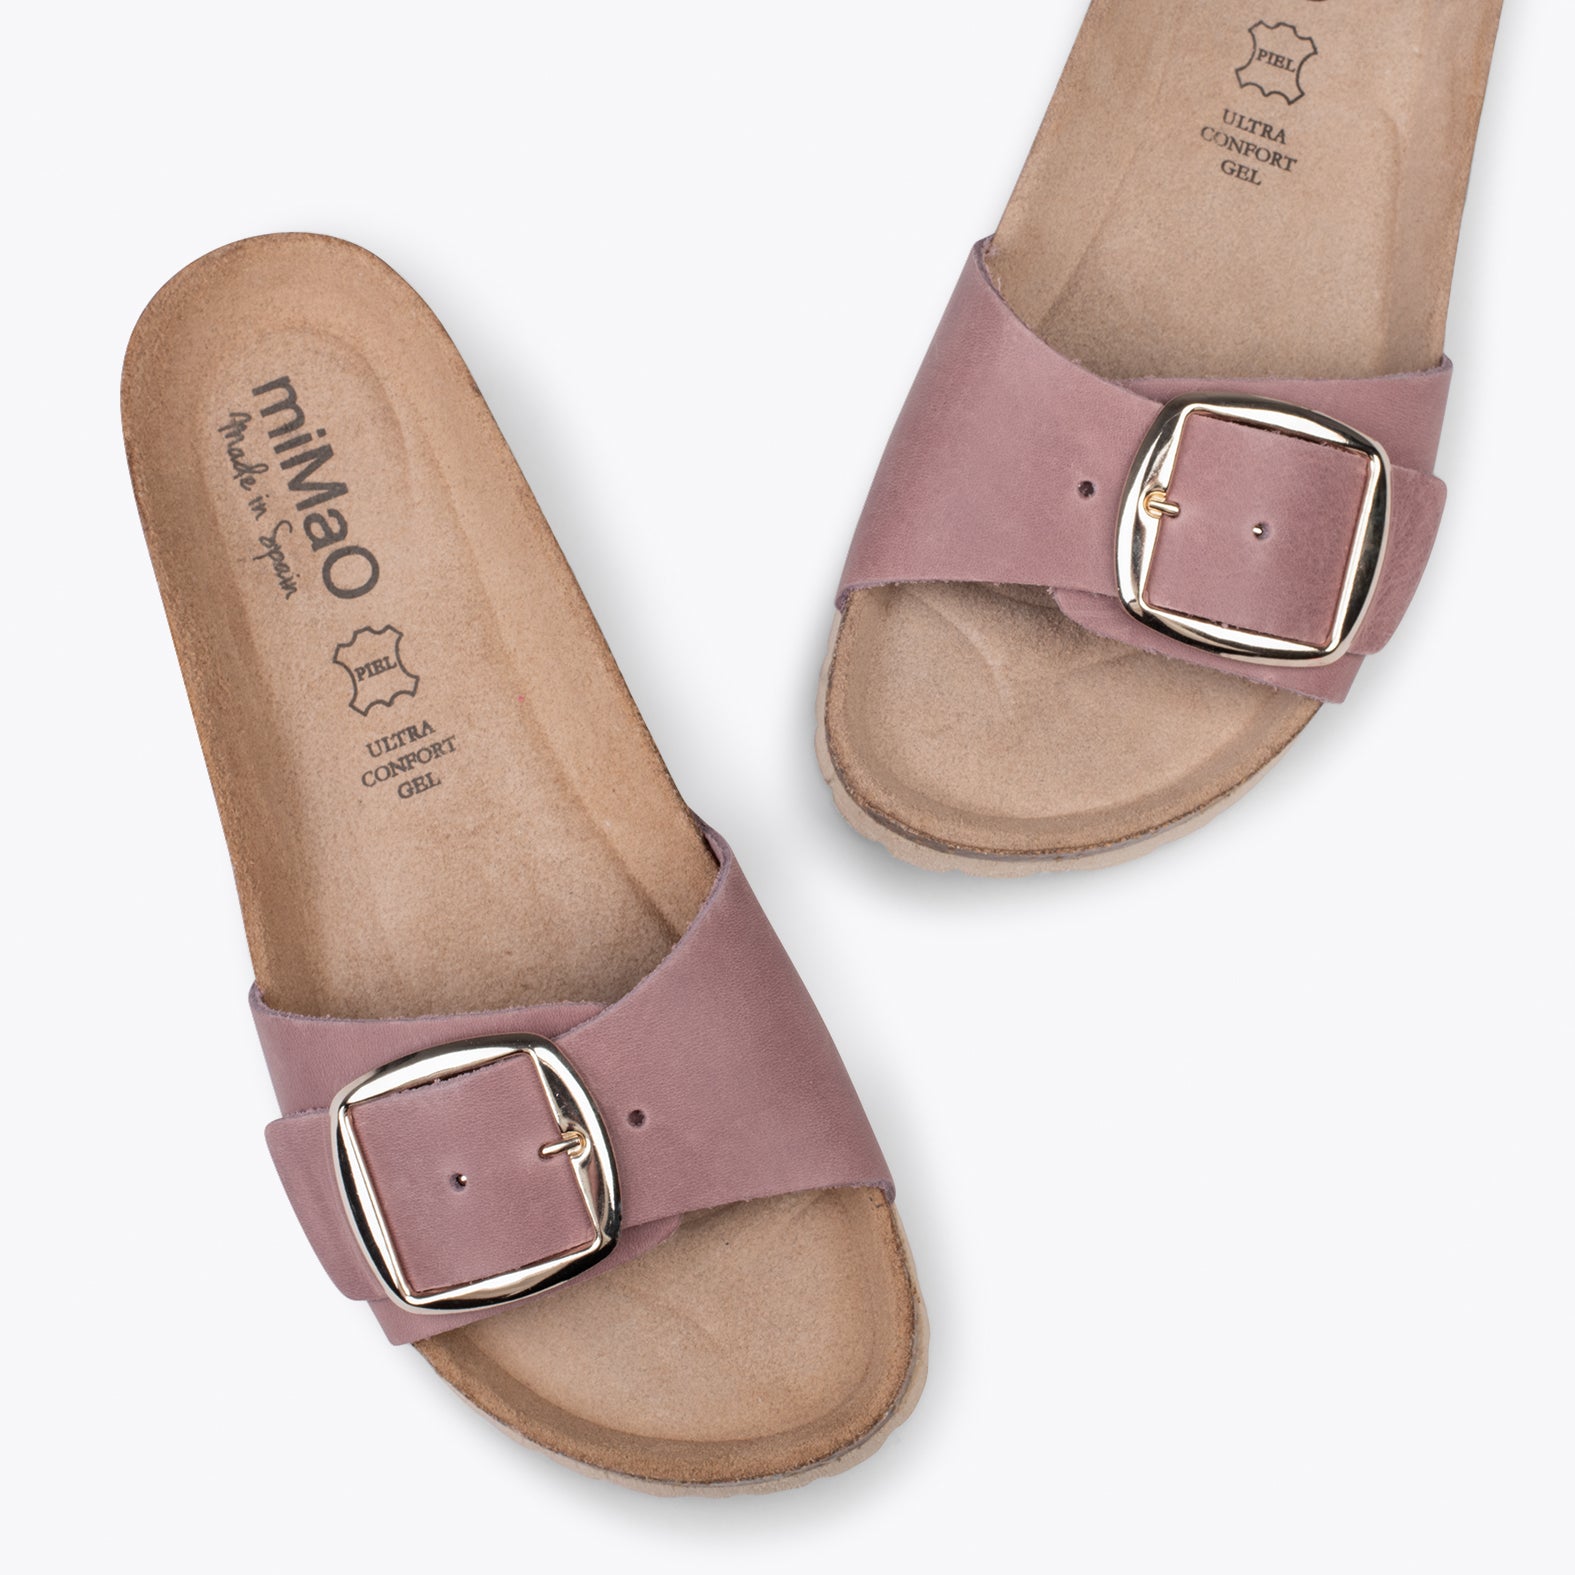 CLAVEL – PINK leather slides with buckle